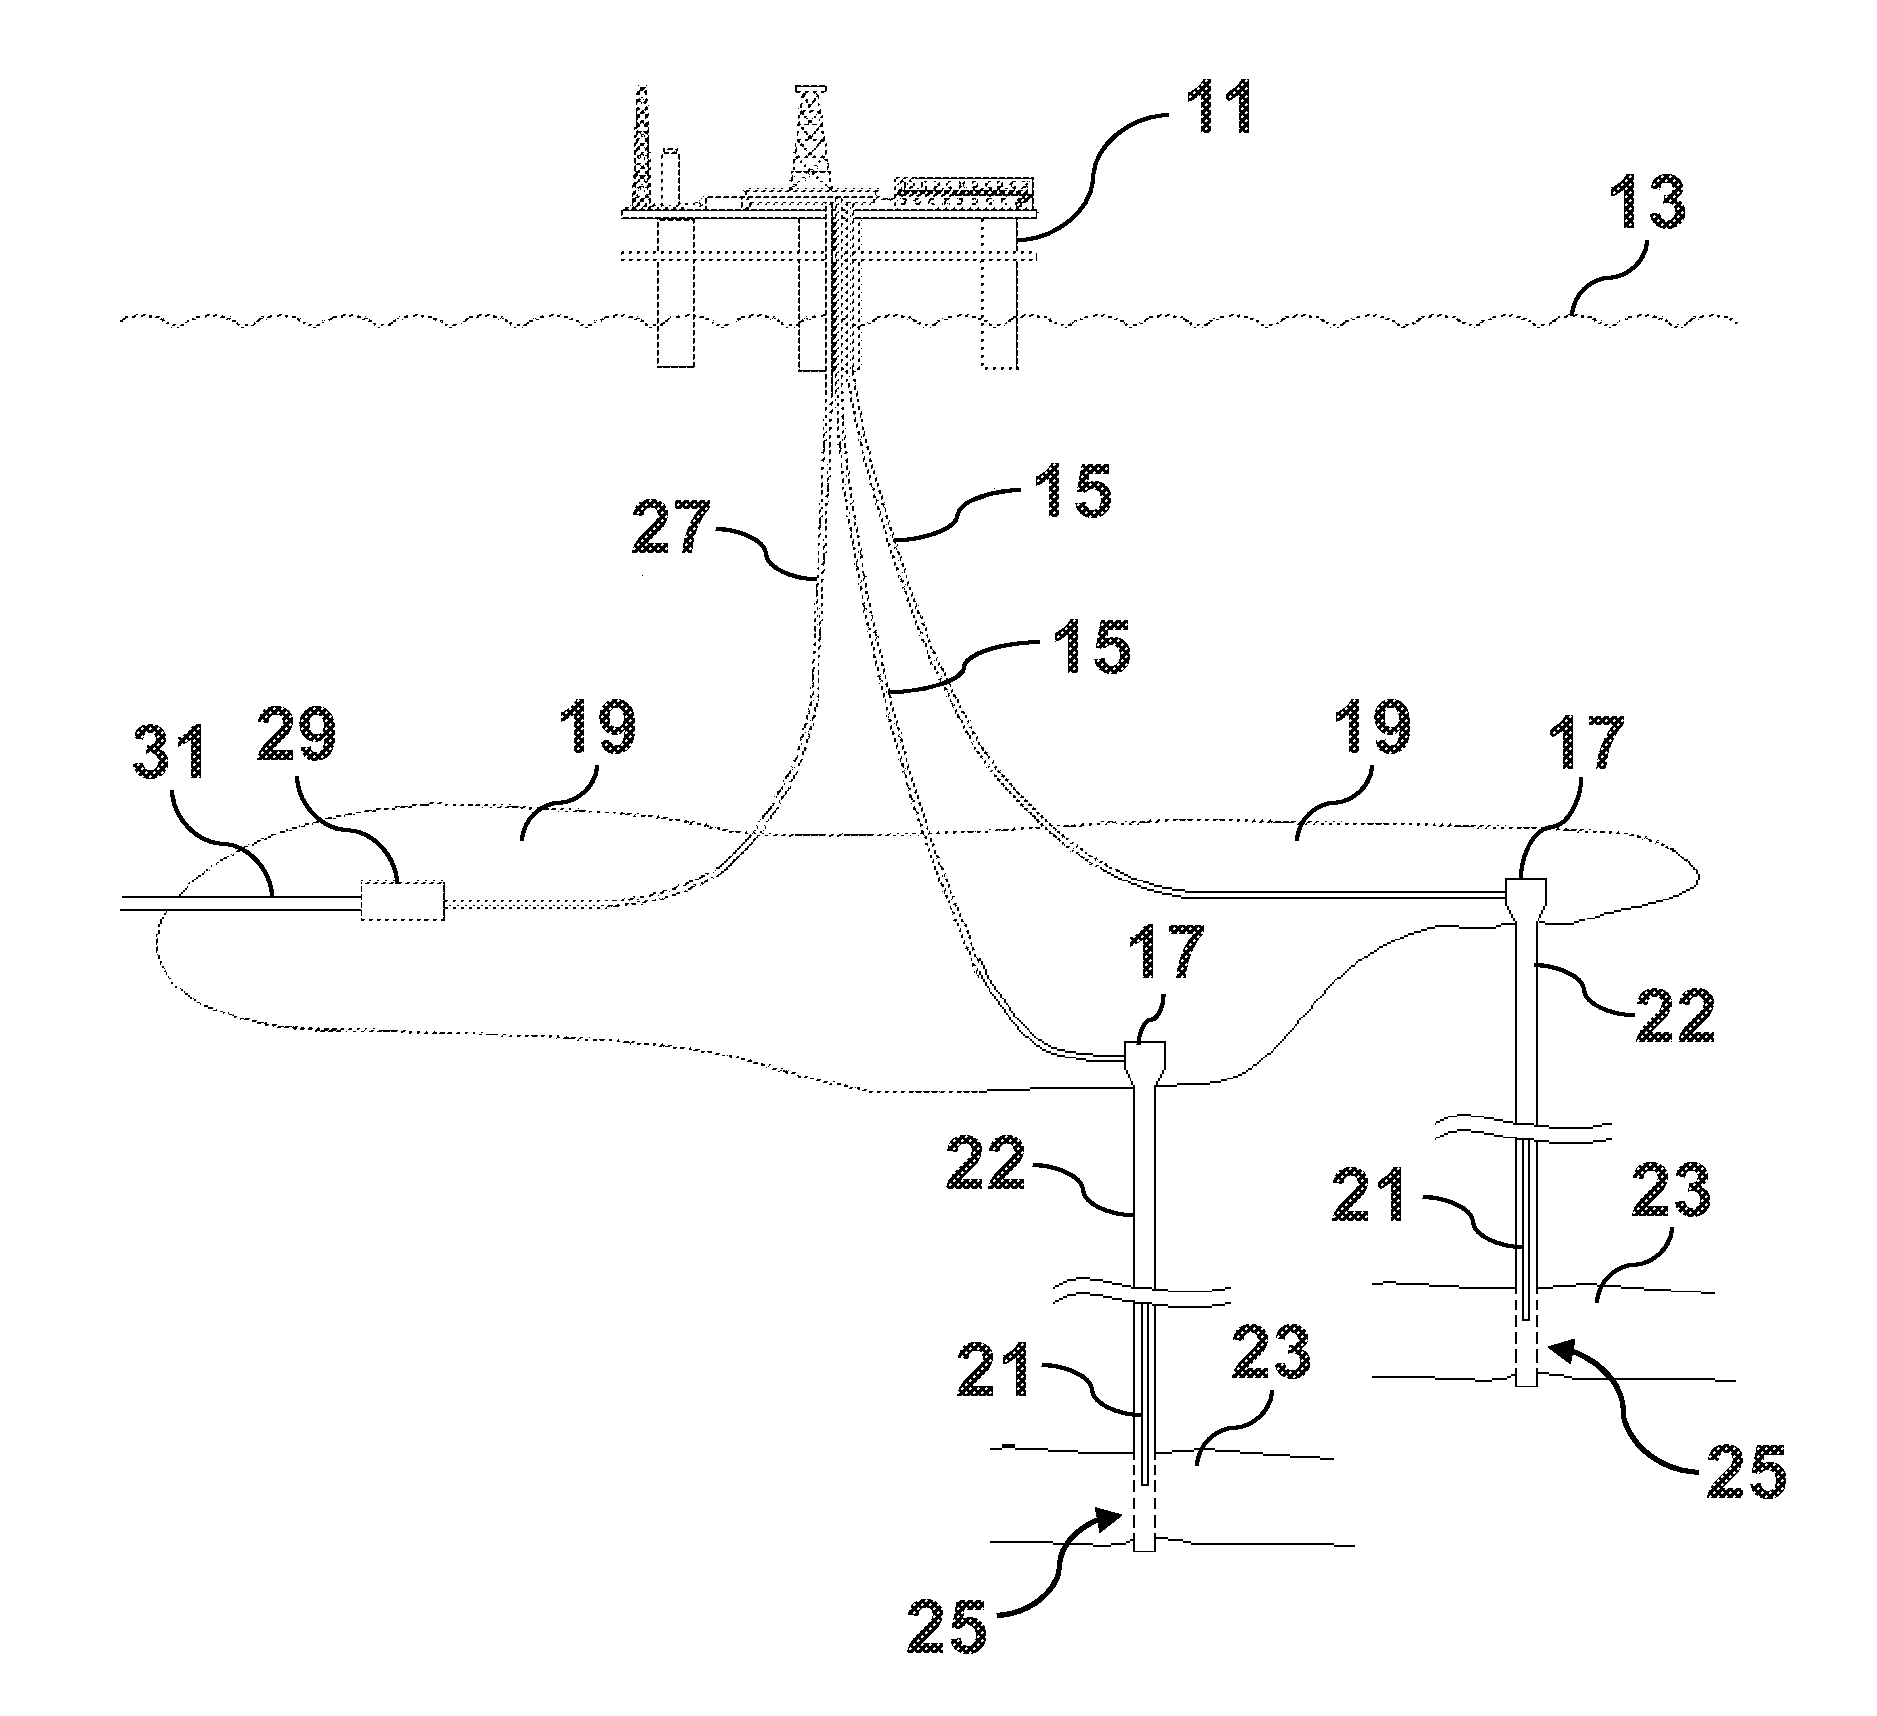 System and method for producing hydrocarbons from a well